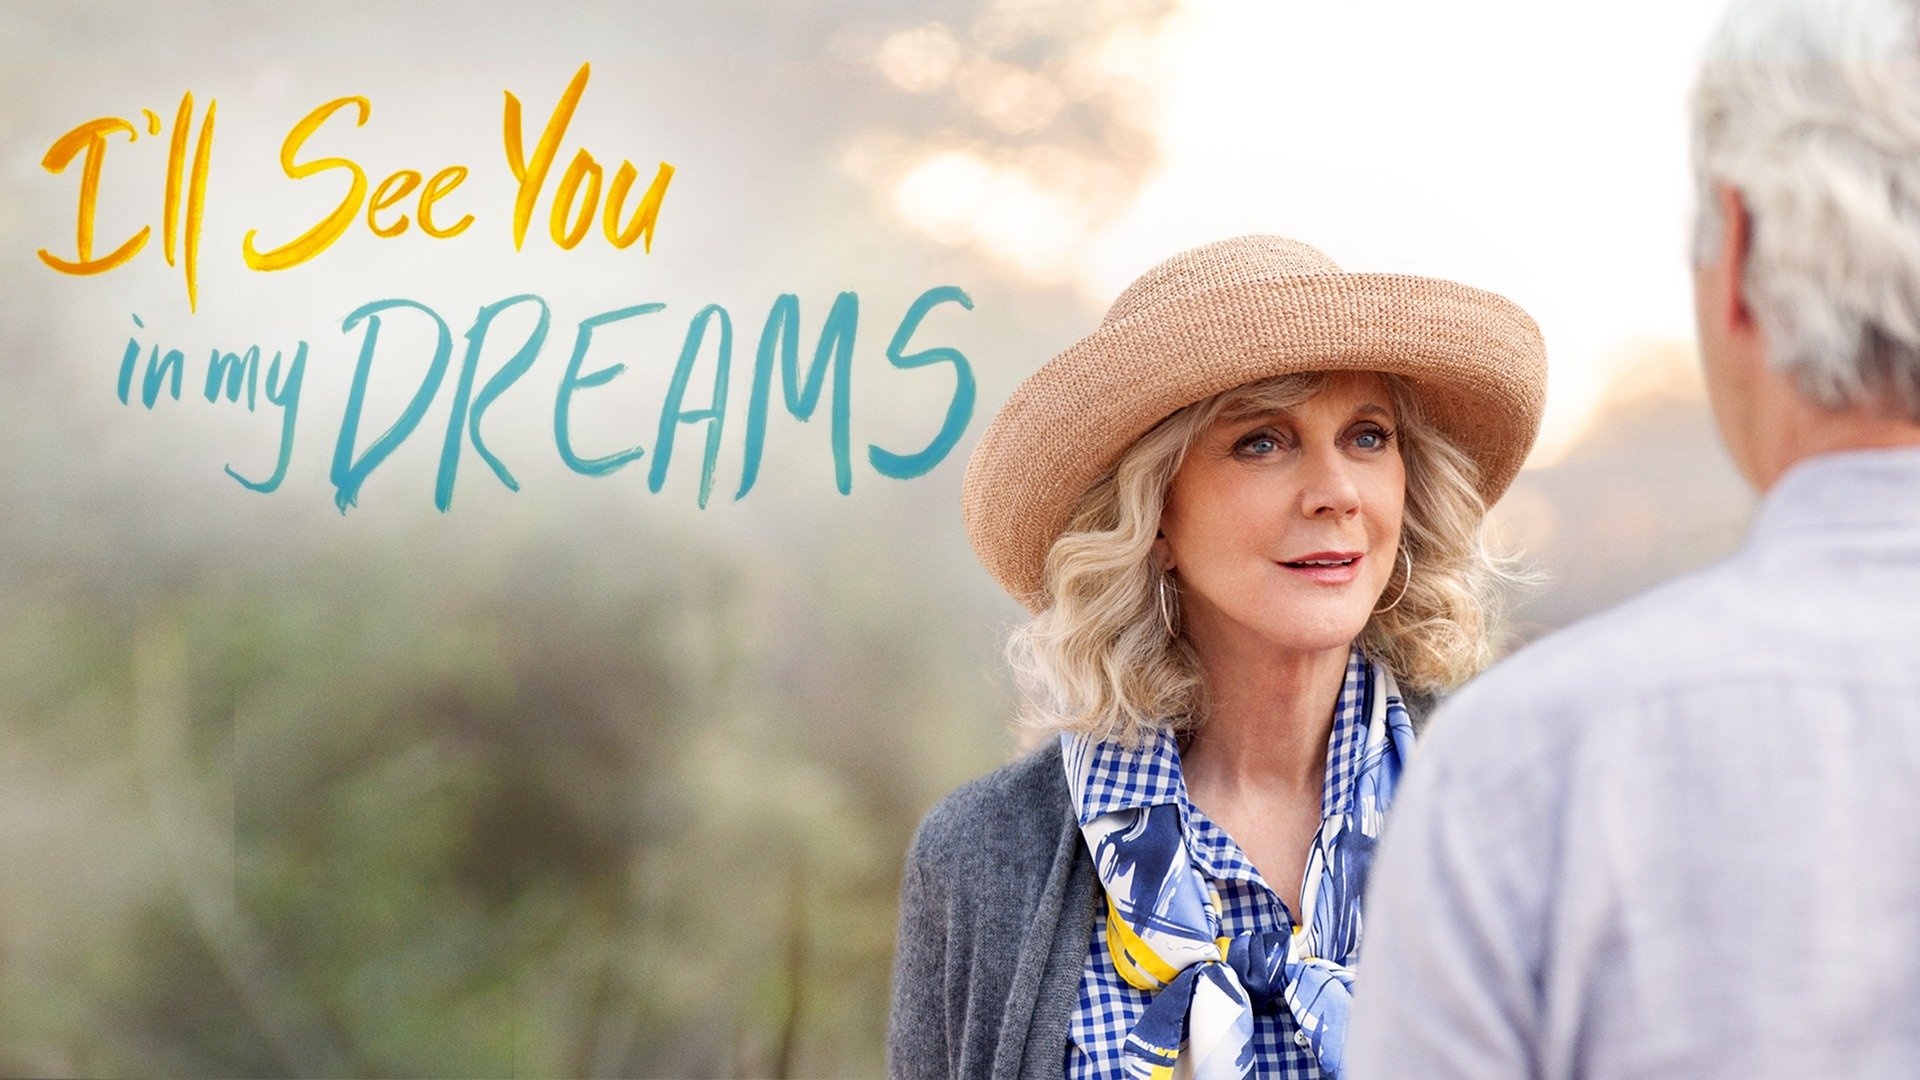 I'll See You in My Dreams (2015), Heartwarming movie, Life reflections, Second chances, 1920x1080 Full HD Desktop